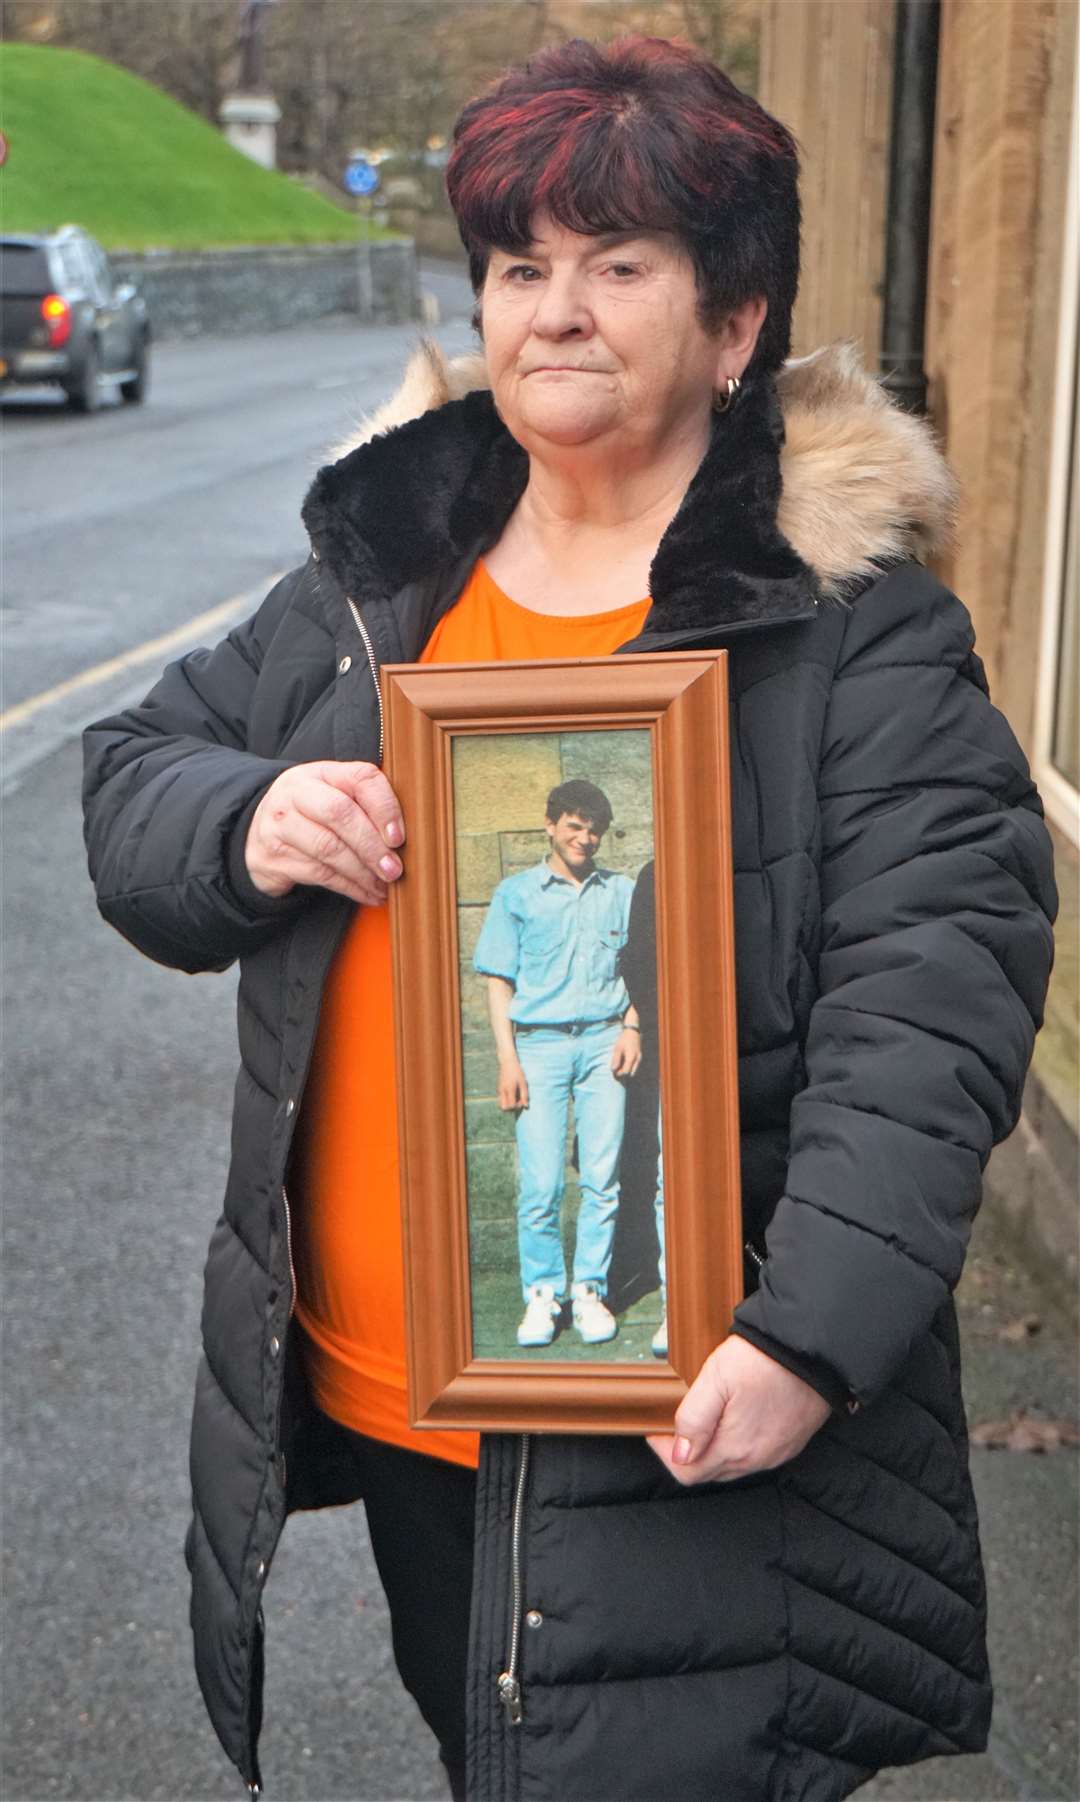 June McLeod holds a portrait of her son Kevin who died in 1997. Picture: DGS